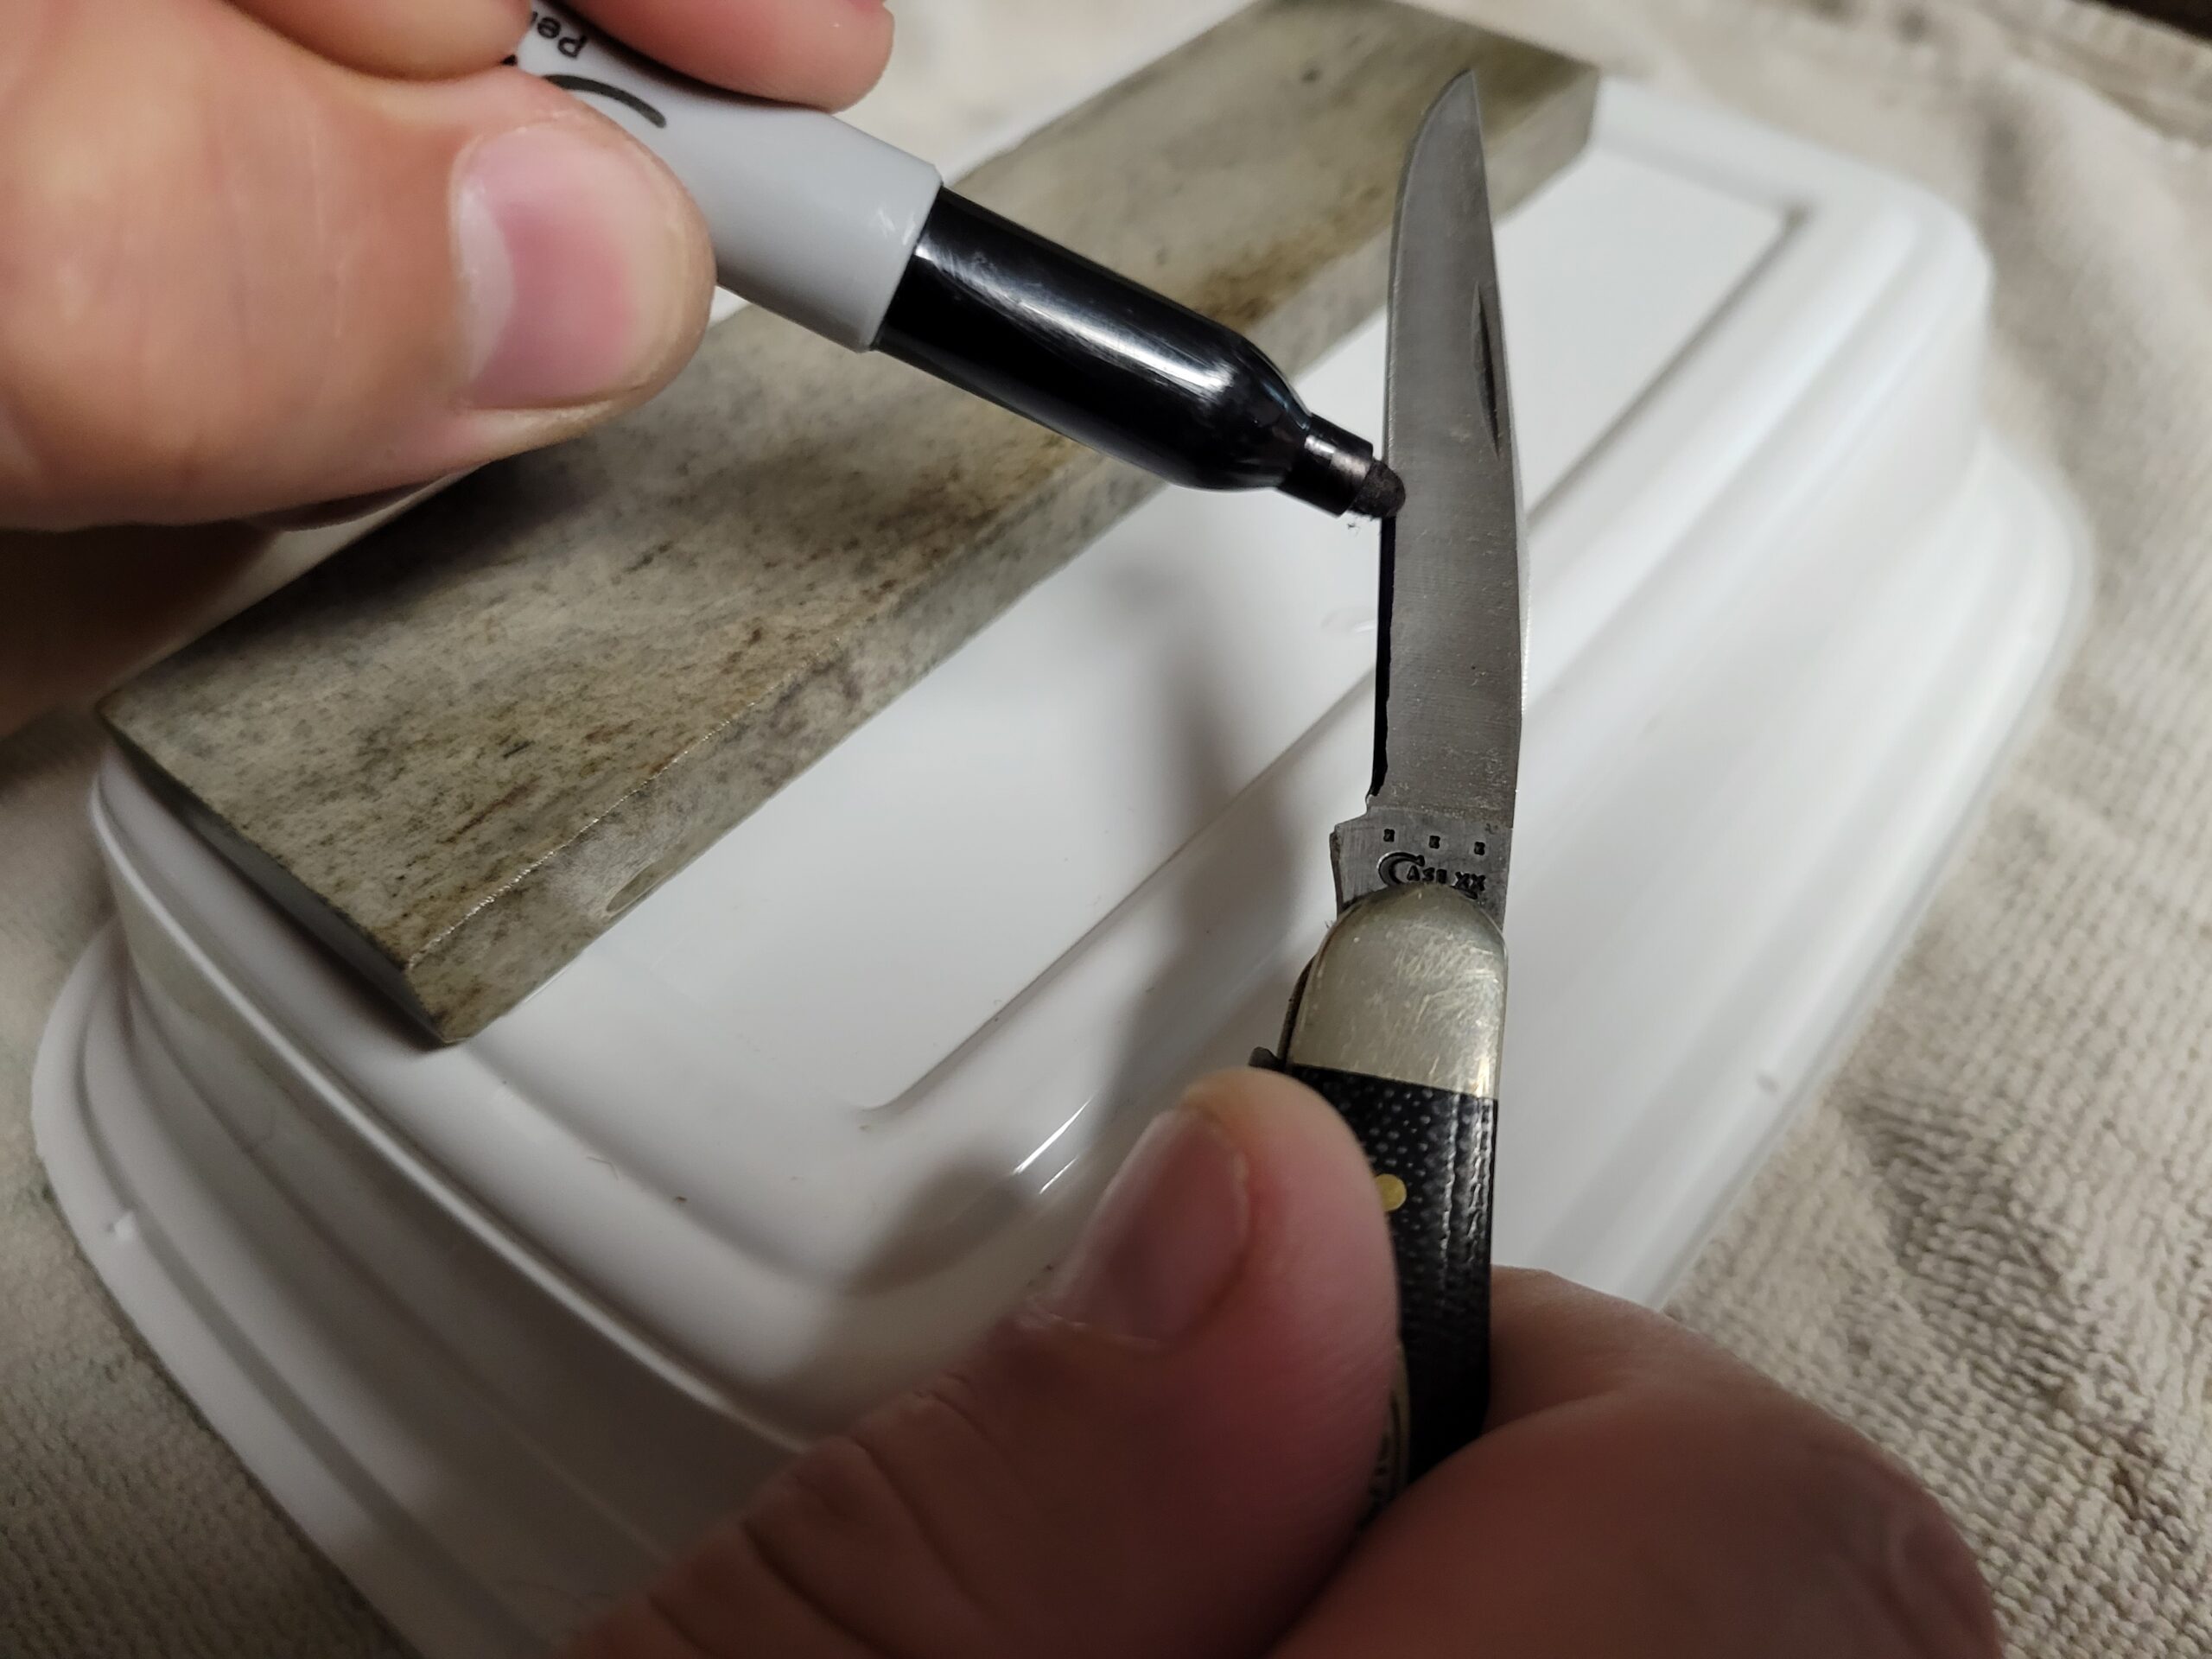 Marking the edge of a pocket knife to find the proper sharpening angle.